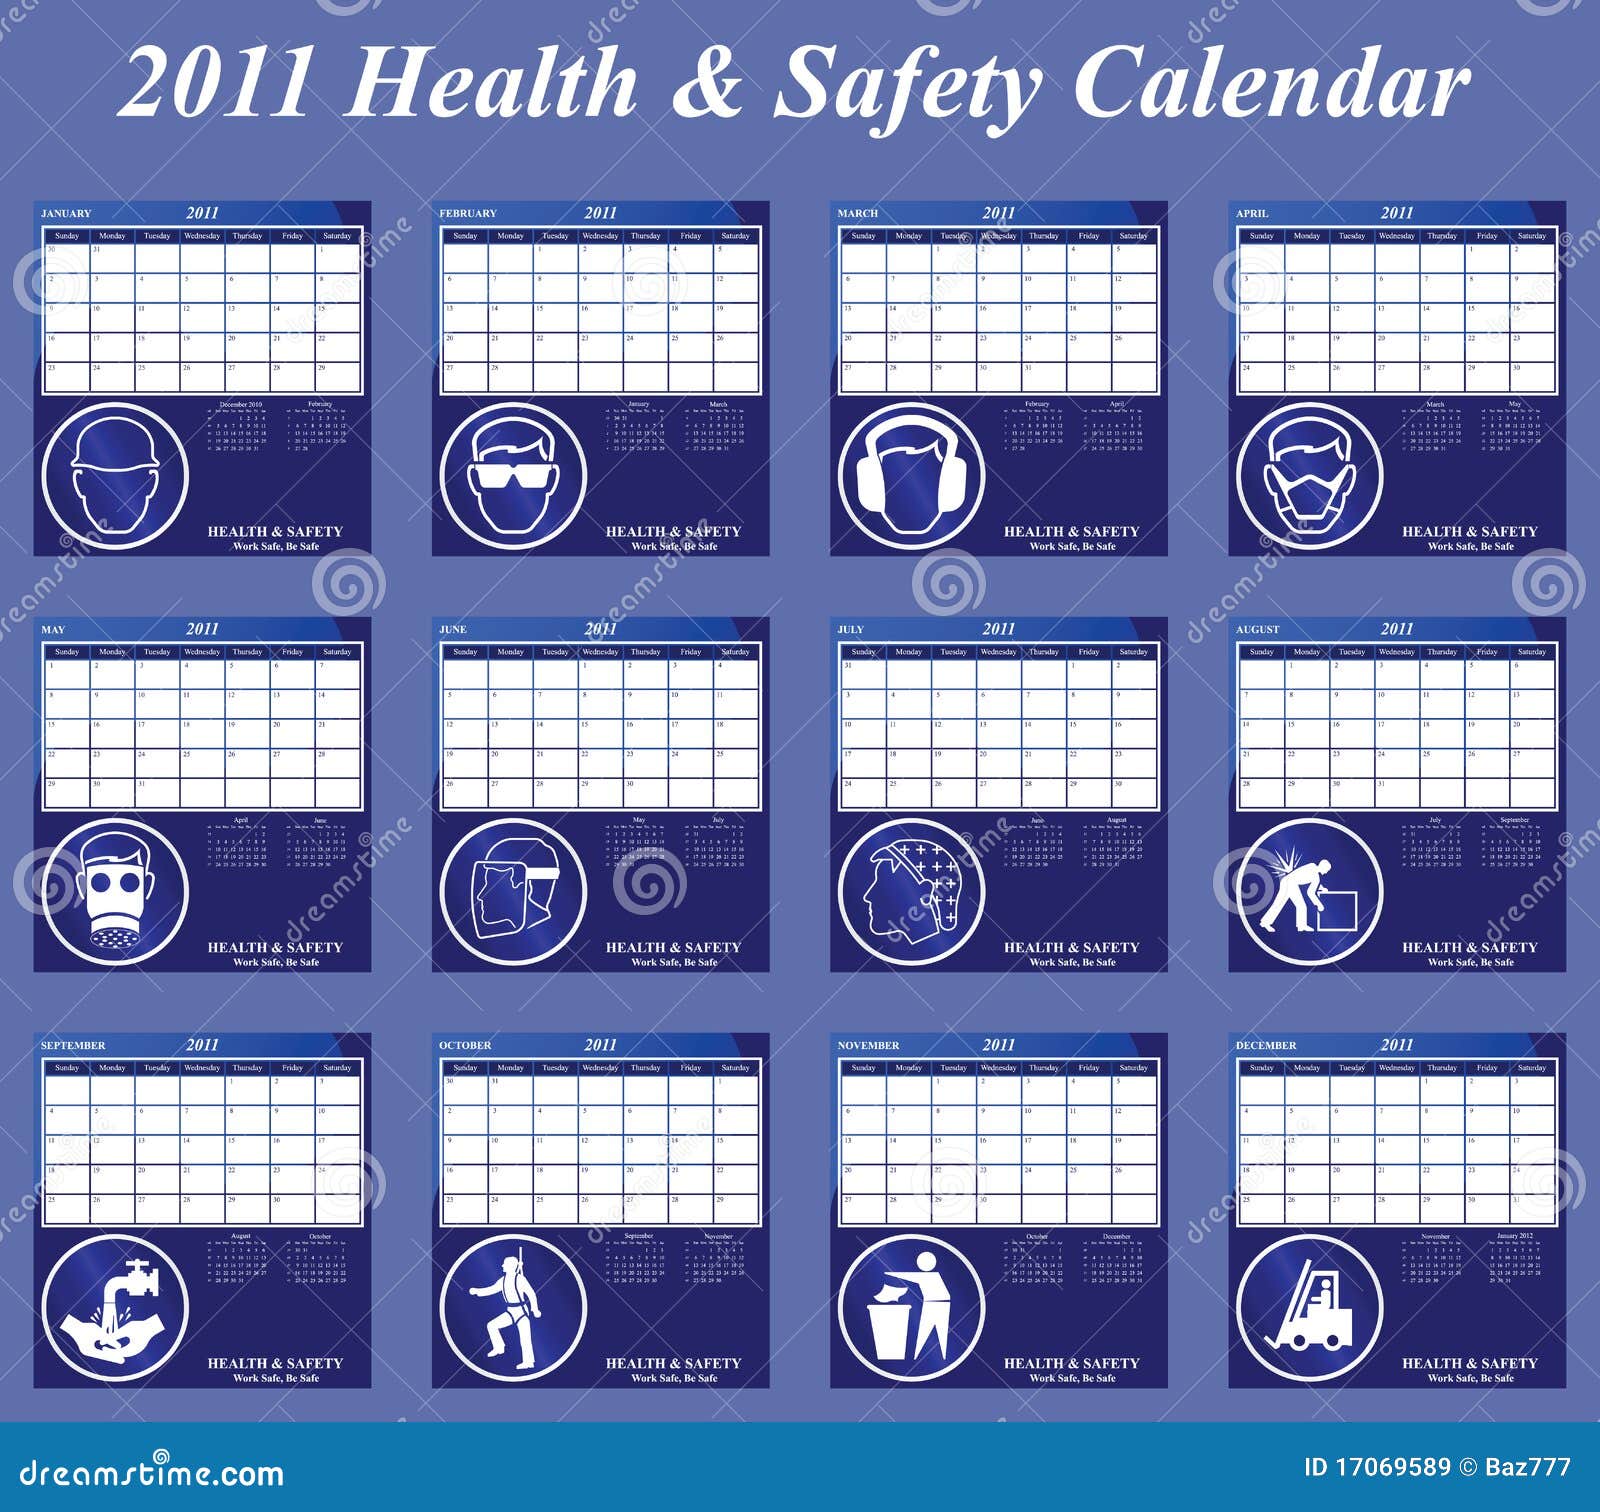 2011-health-and-safety-calendar-royalty-free-stock-images-image-17069589